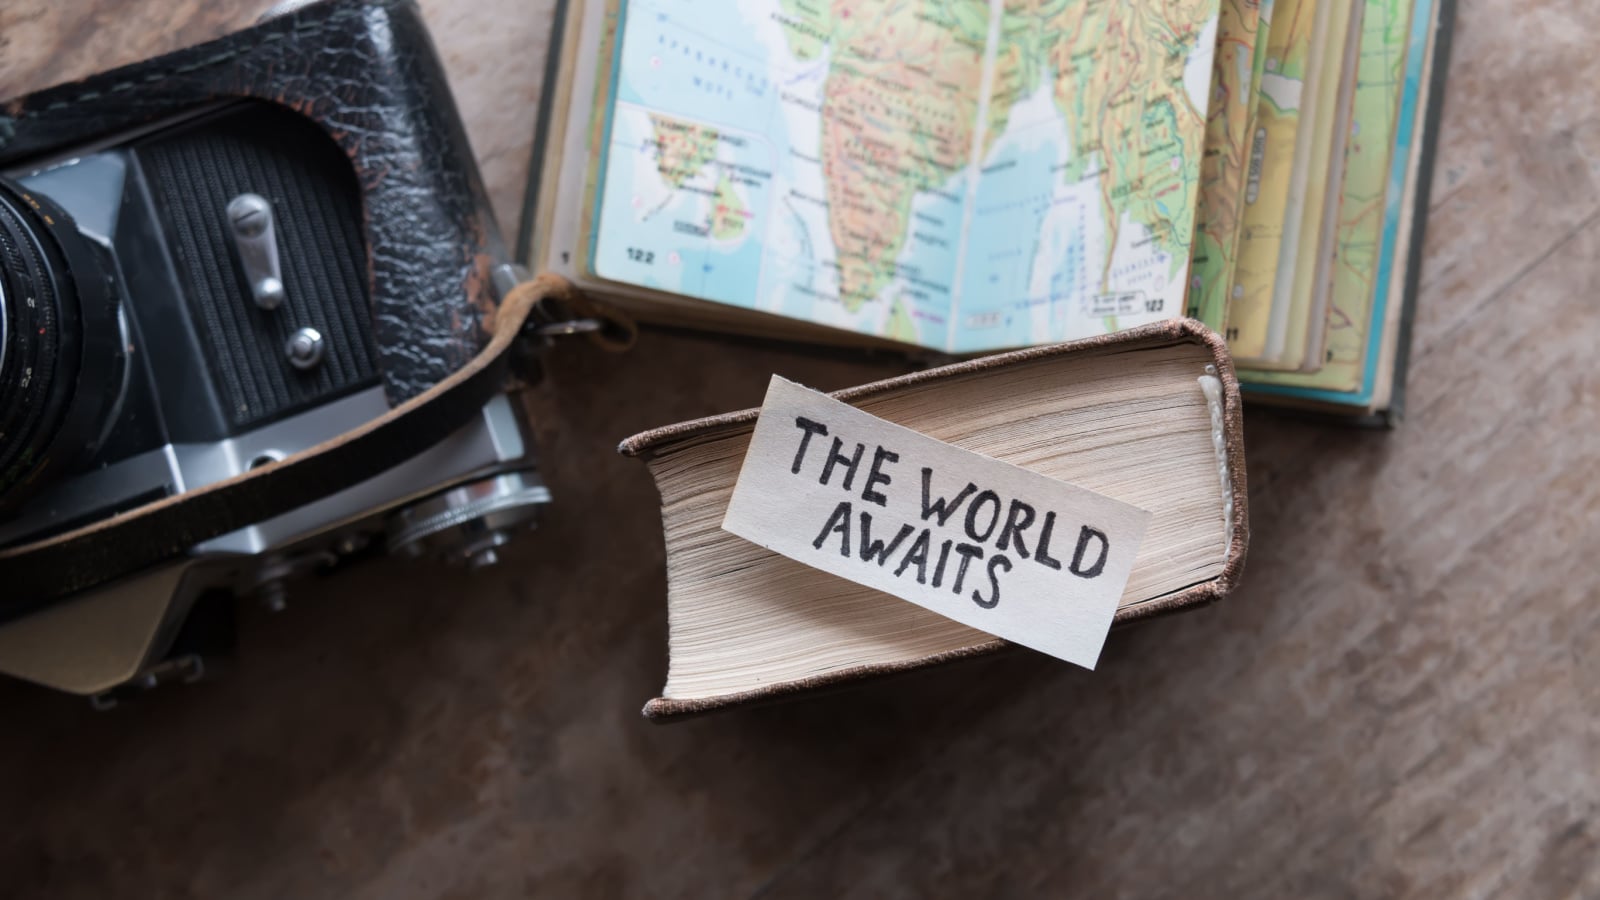 text "The World Awaits" and book, travel, tour, tourism concept